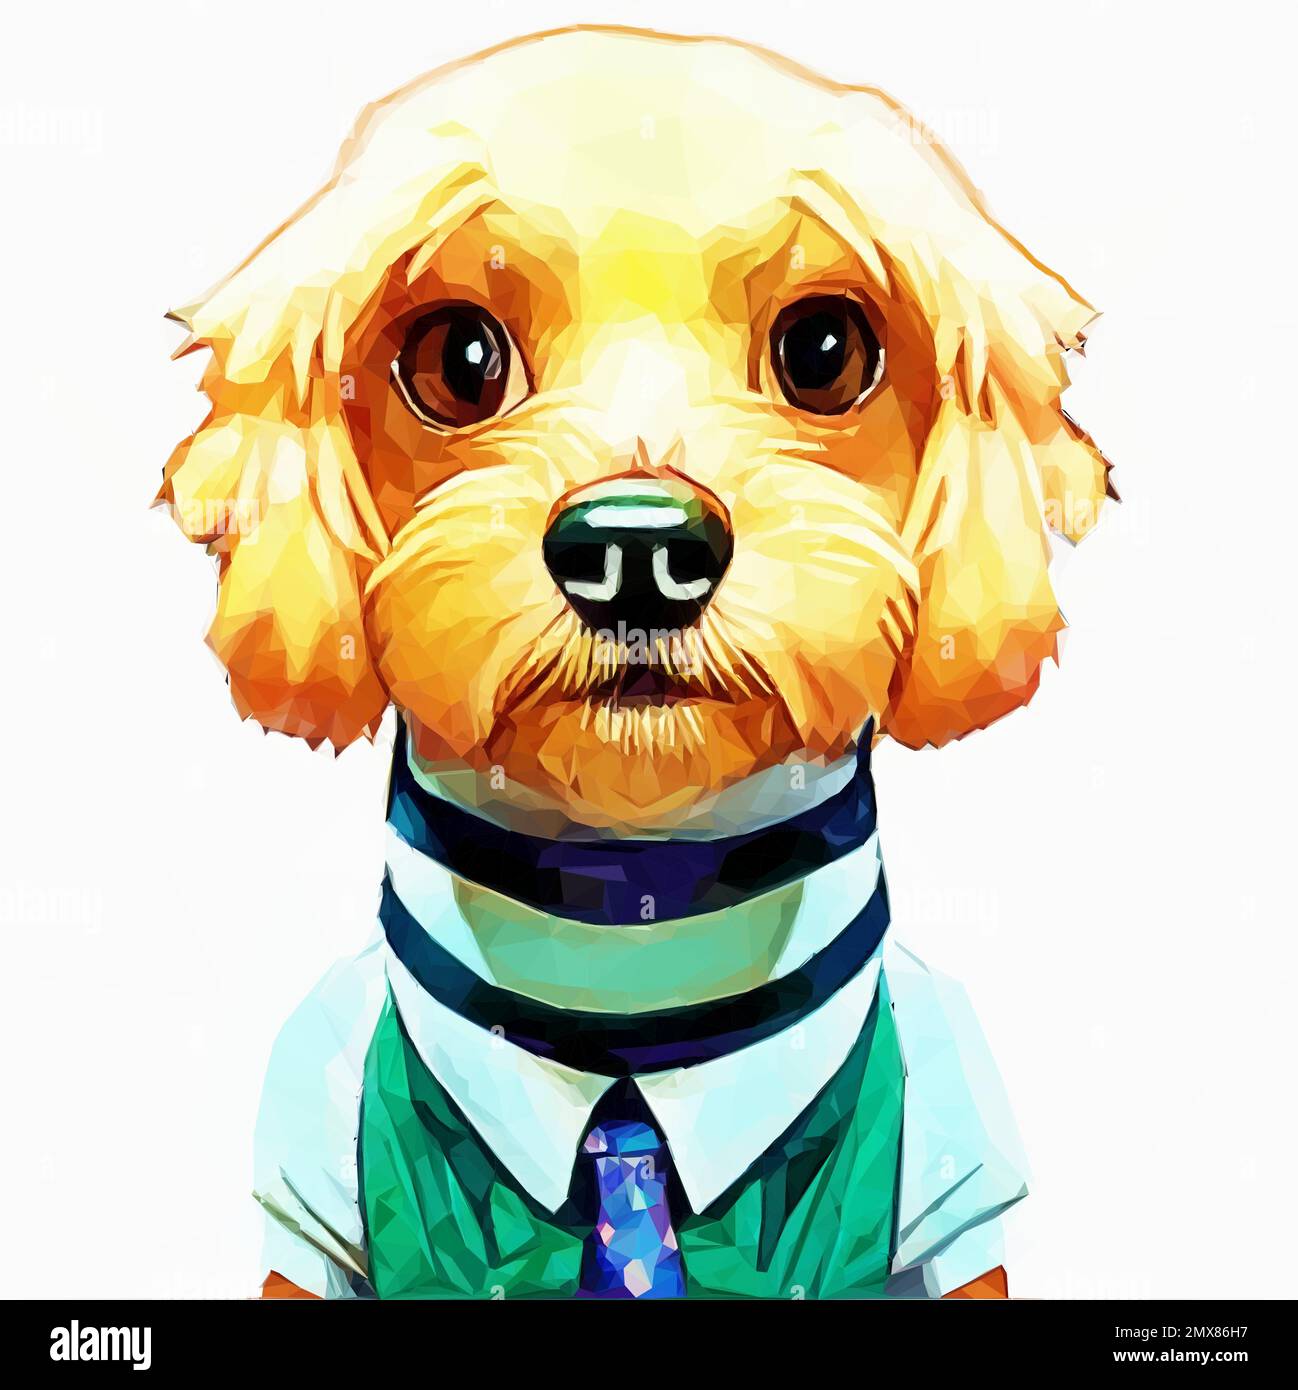 Fluffy character dog with a large Wild West collar and tie. Vector illustration in low poly art. Stock Vector